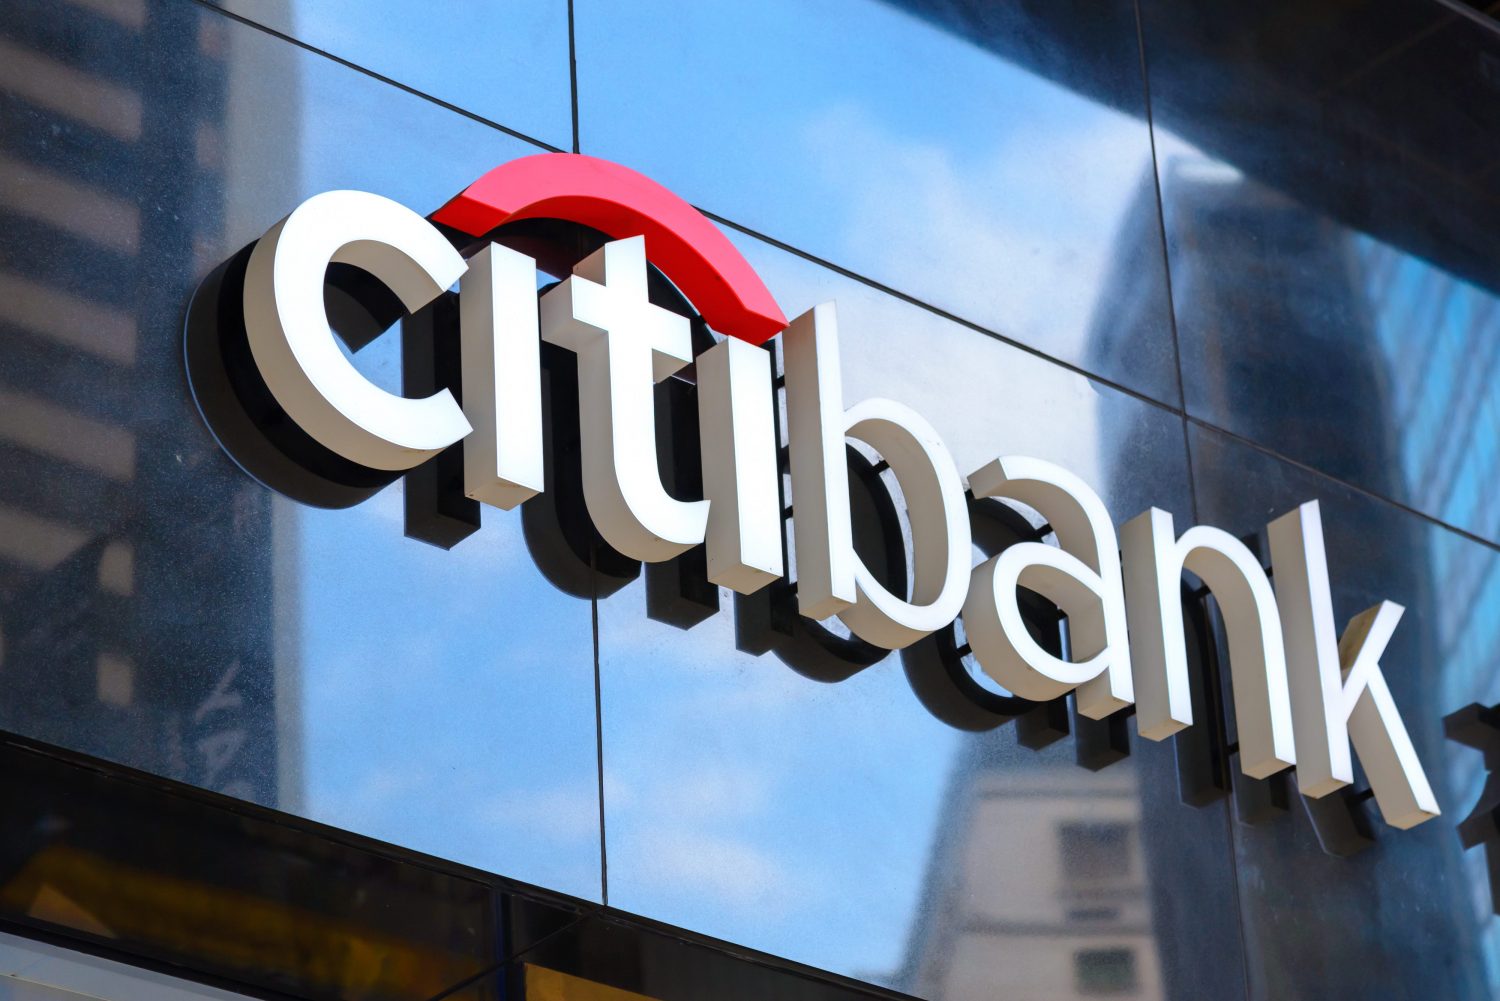 Citibank Won't Reimburse Scam Victims Who Lost Their Savings Due to Bank's Own Security Glitch